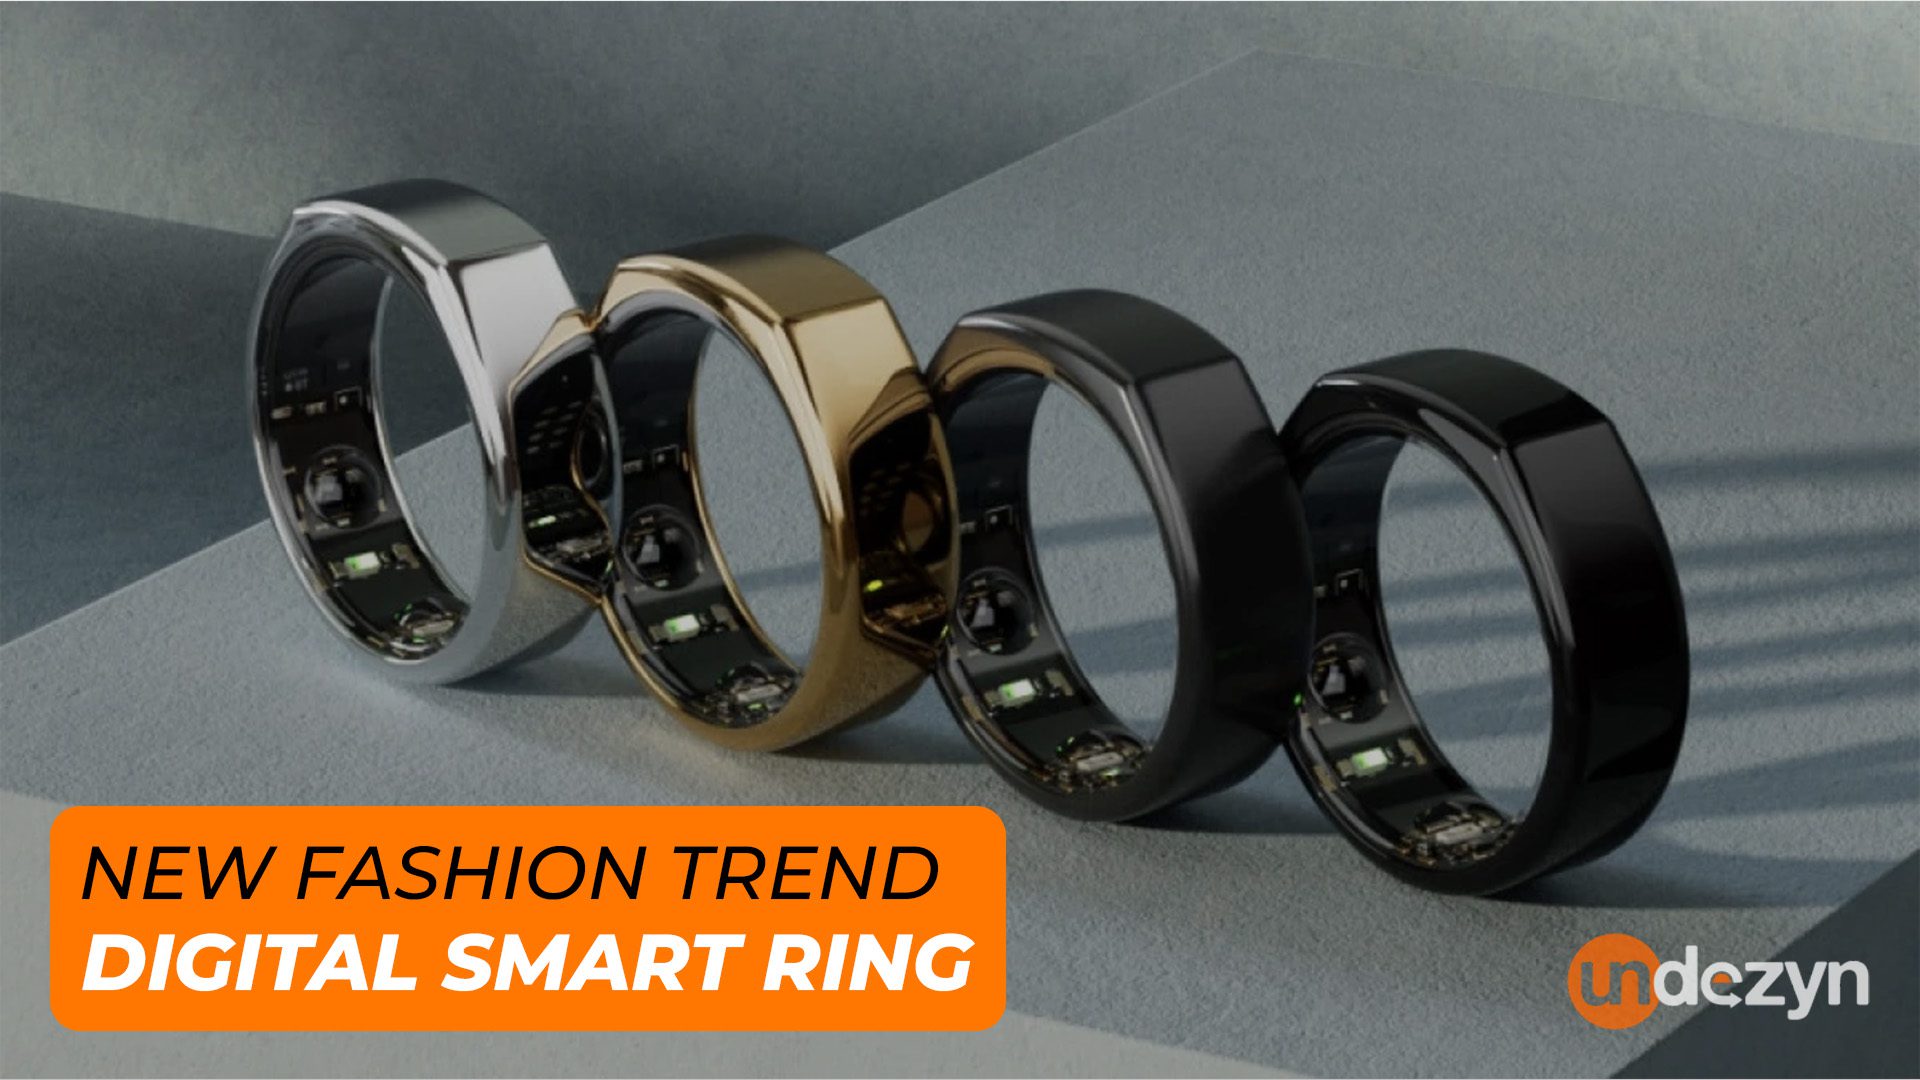 The Future at Your Fingertips: Smart Ring! - Undezyn